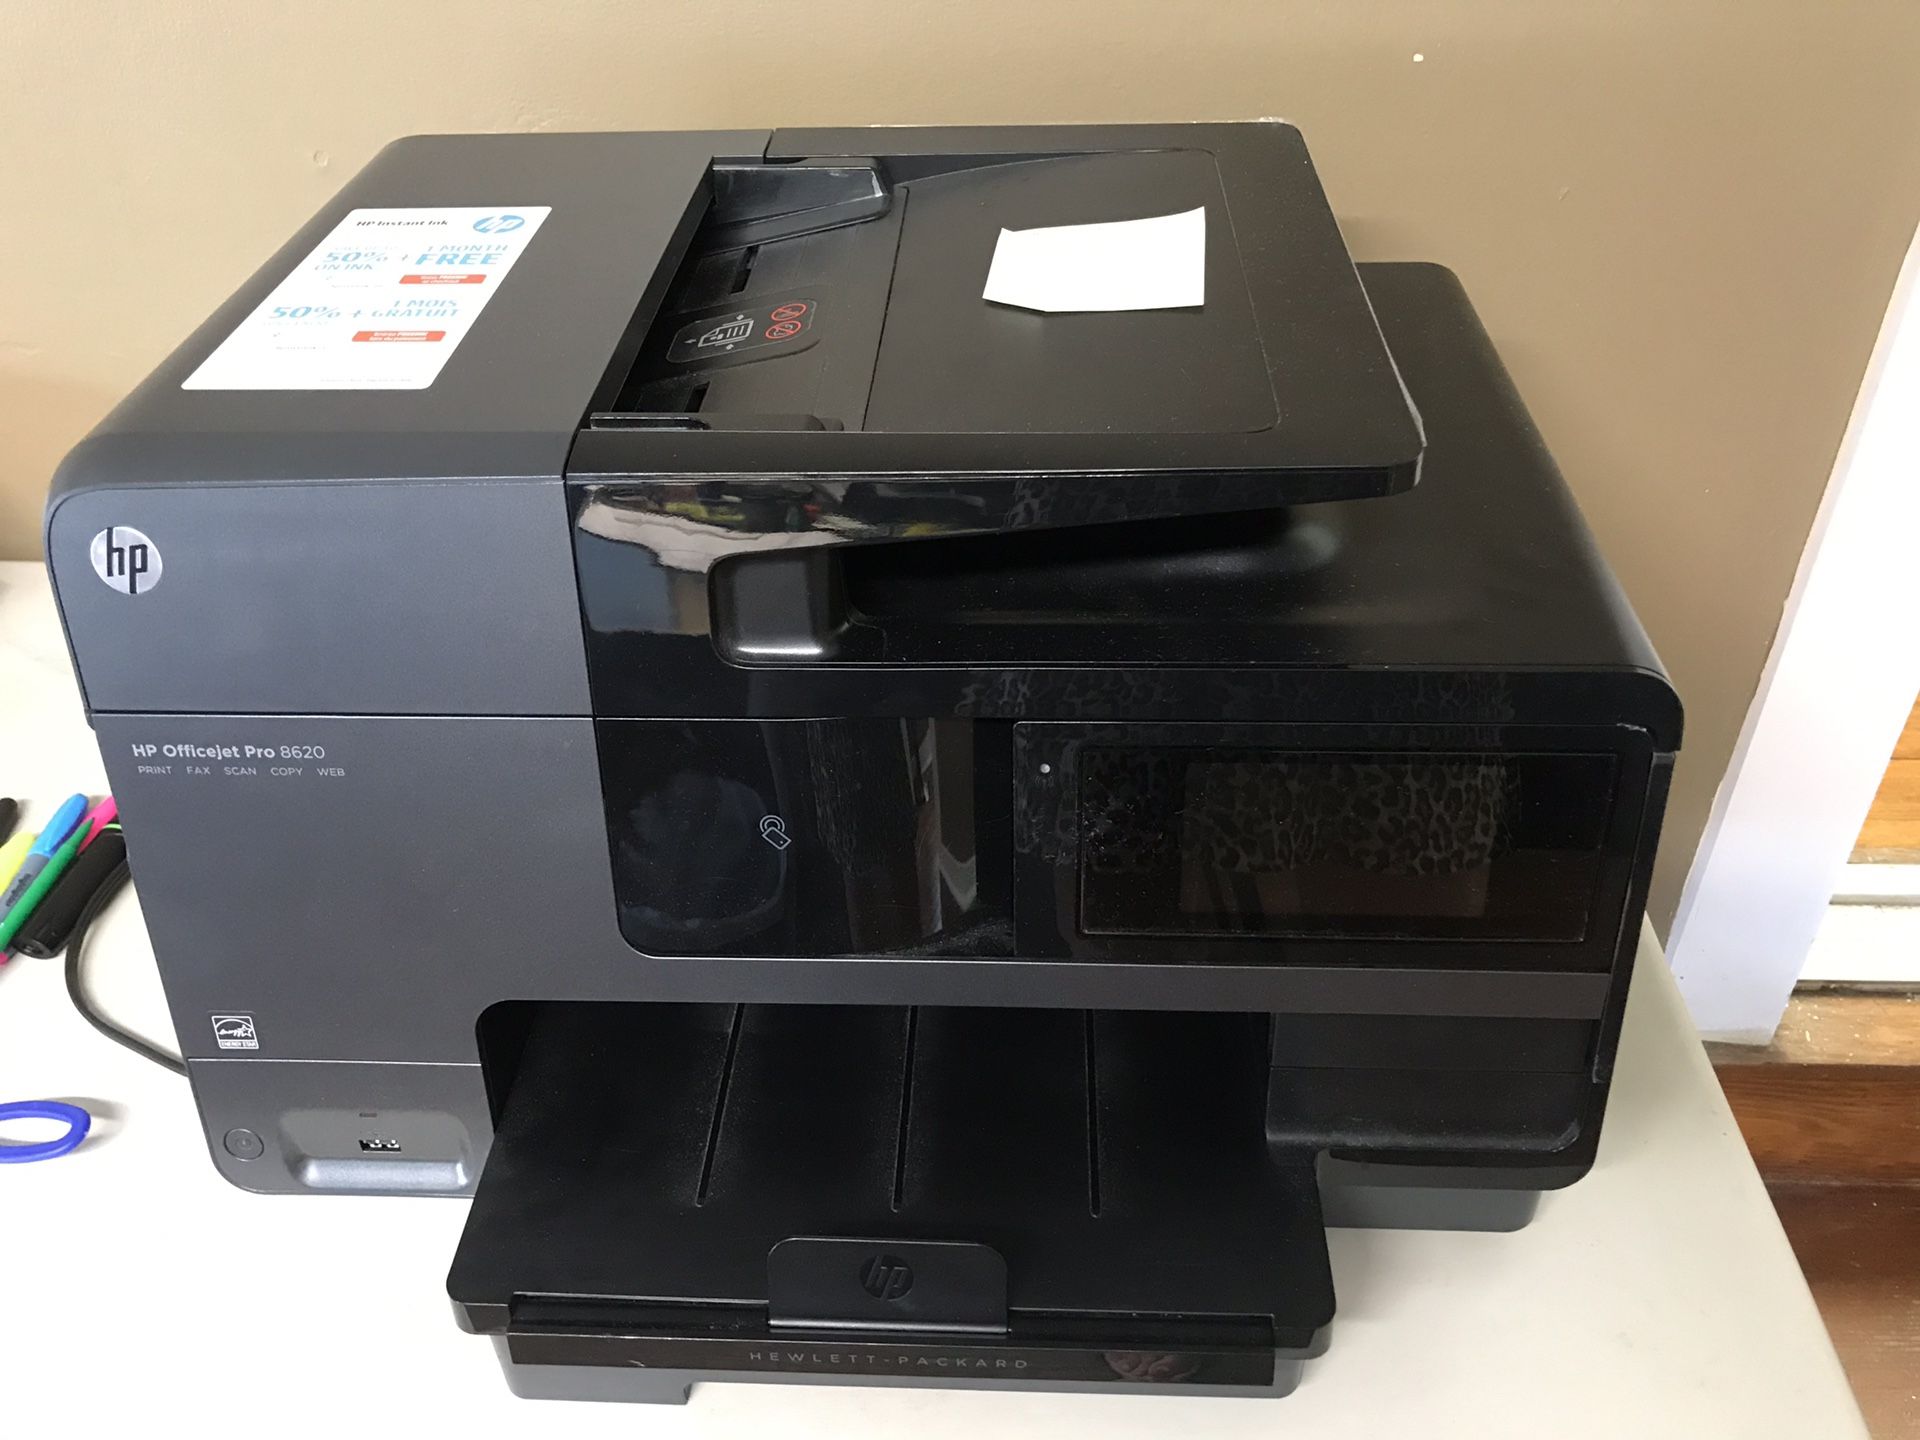 Printer-scanner. HP with ink